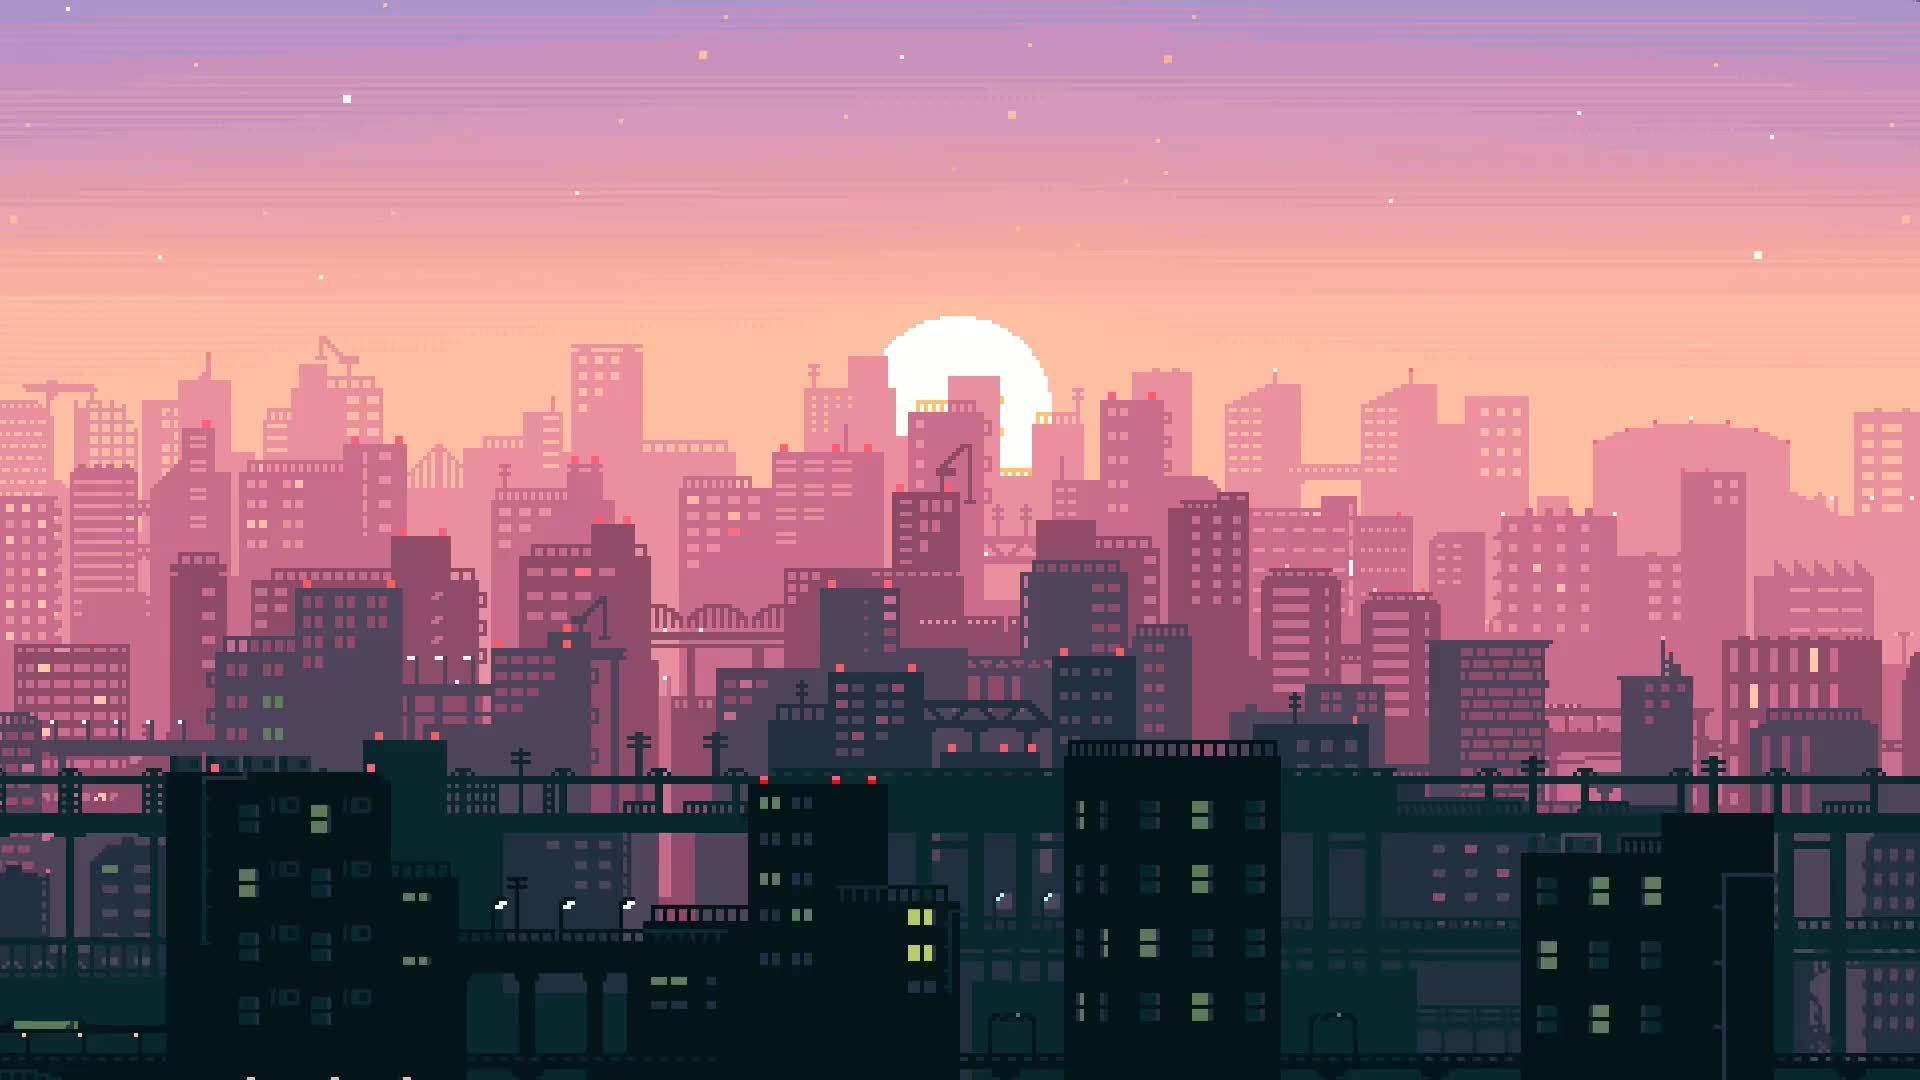 Aesthetic City Computer Wallpaper Free Aesthetic City Computer Background